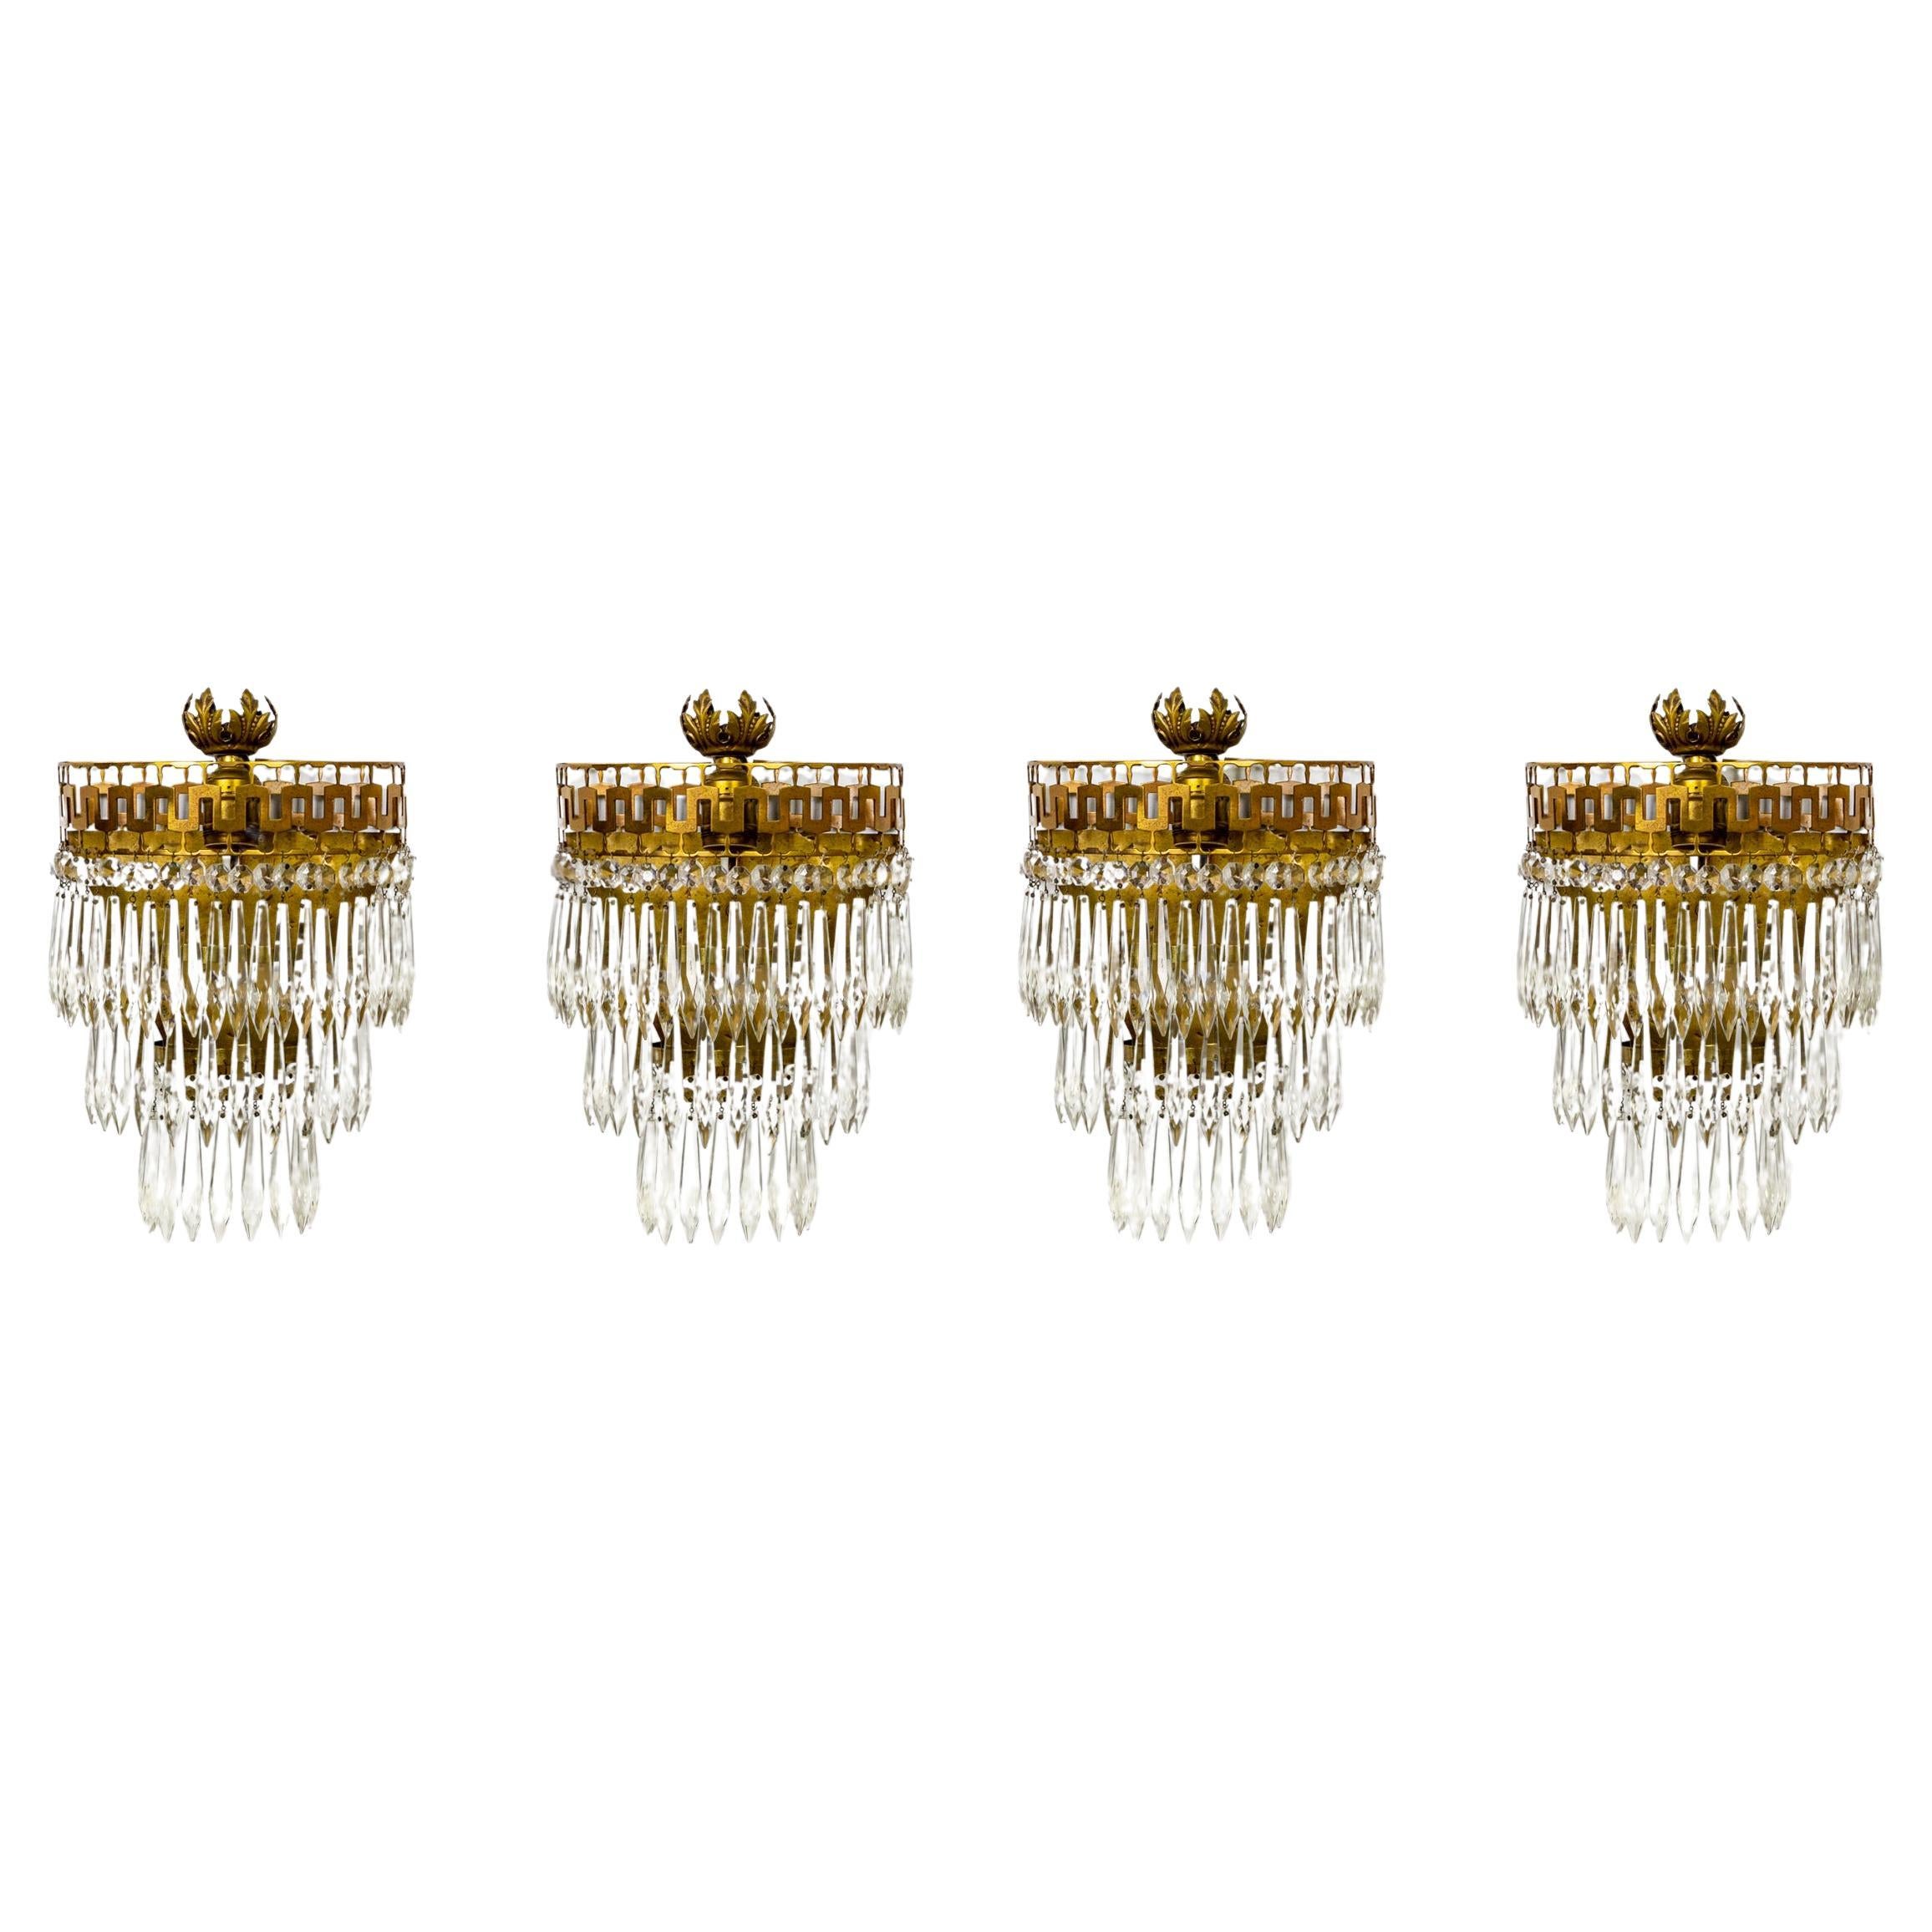 Mid-20th Cent. Neoclassical Cut Brass & Crystal Wedding Cake Wall Lights 'Pair'